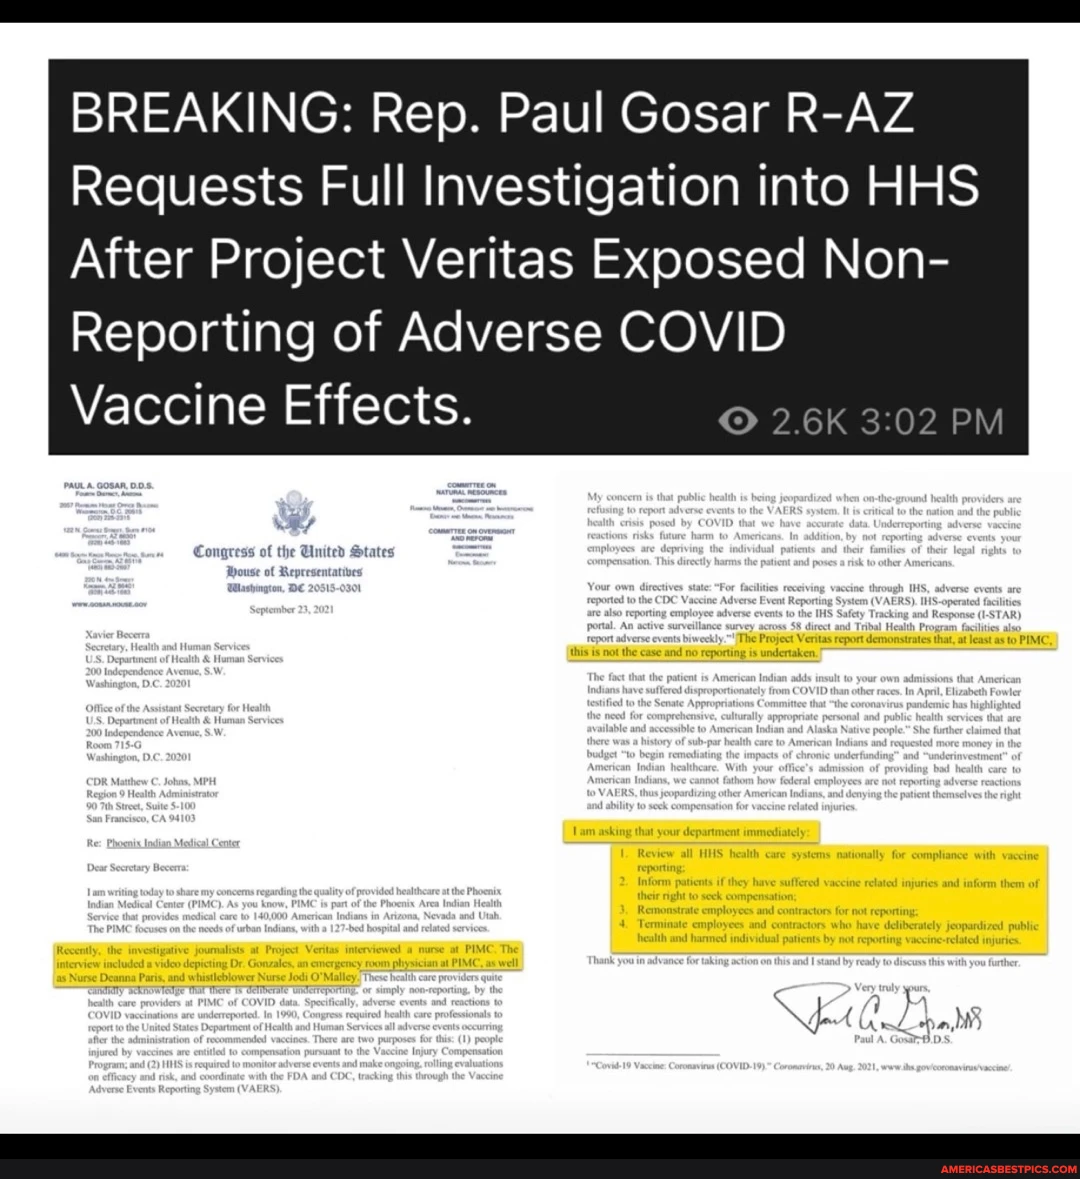 BREAKING: Rep. Paul Gosar R-AZ Requests Full Investigation into HHS After Project Veritas Exposed Non-Reporting of Adverse COVIDVaccine Effects. 2.6K PMwa